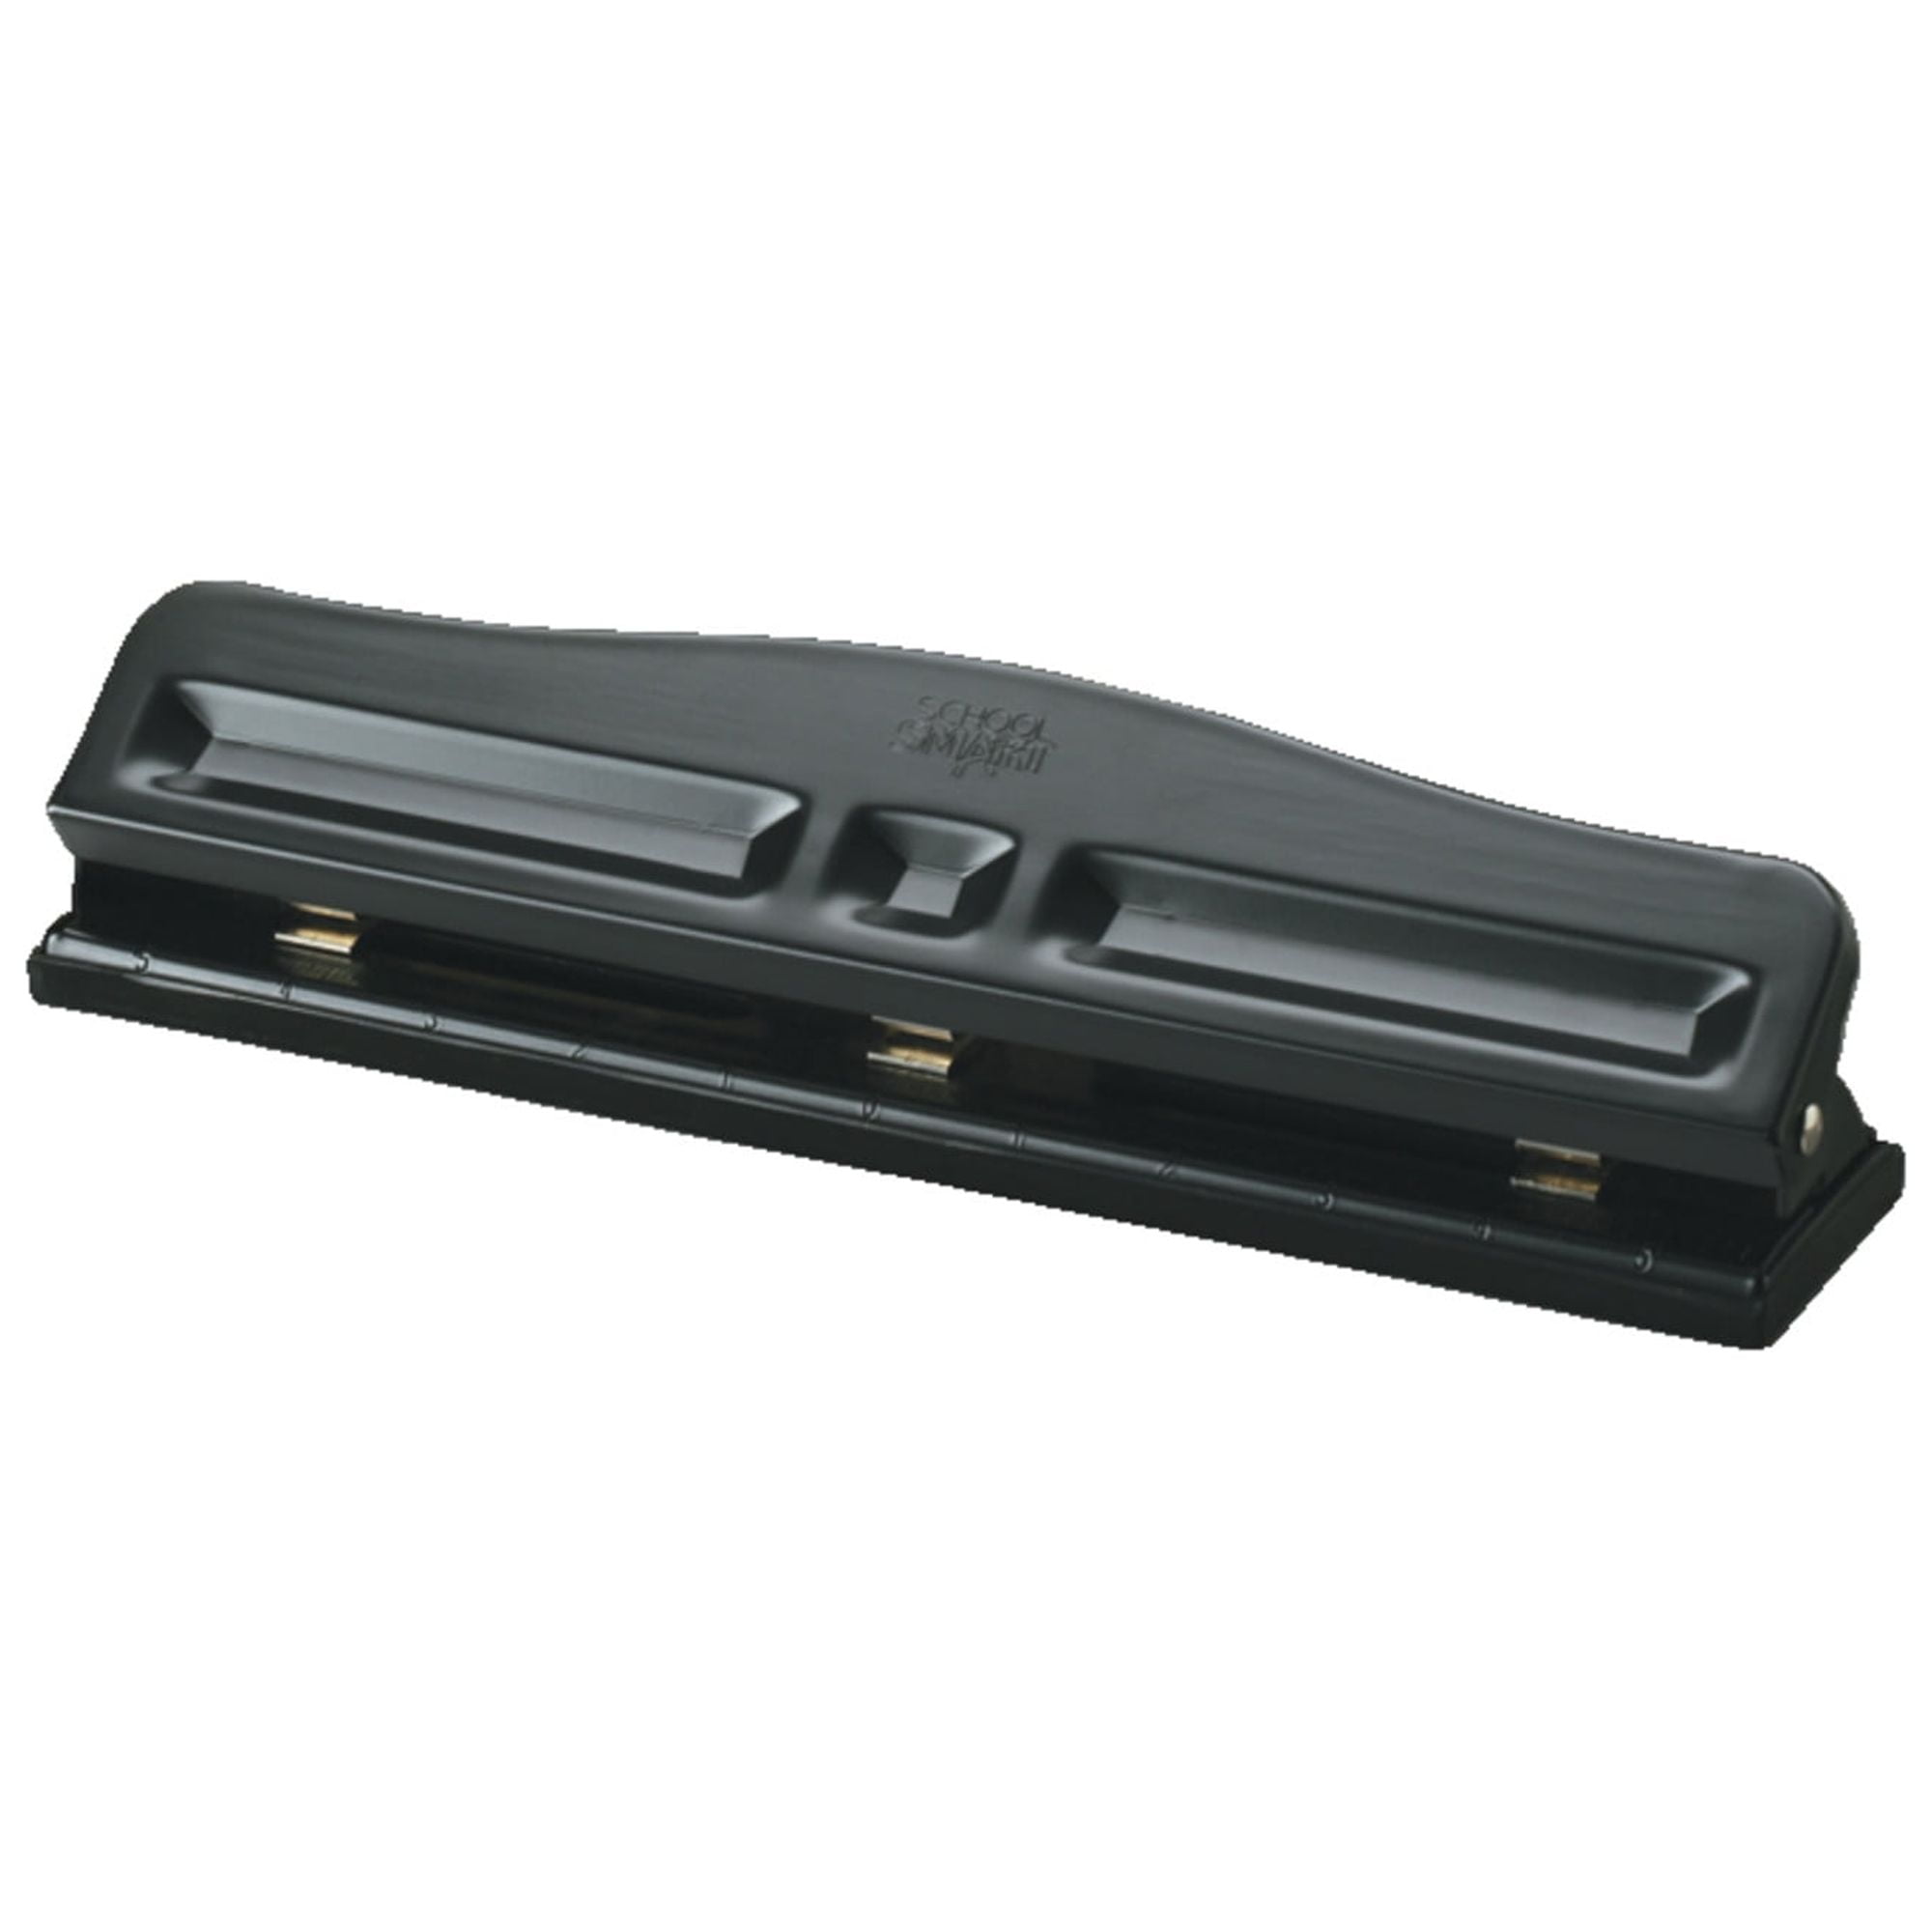 Wexford Hole Punch 10.25 X 2.125 X 2.125 IN Black